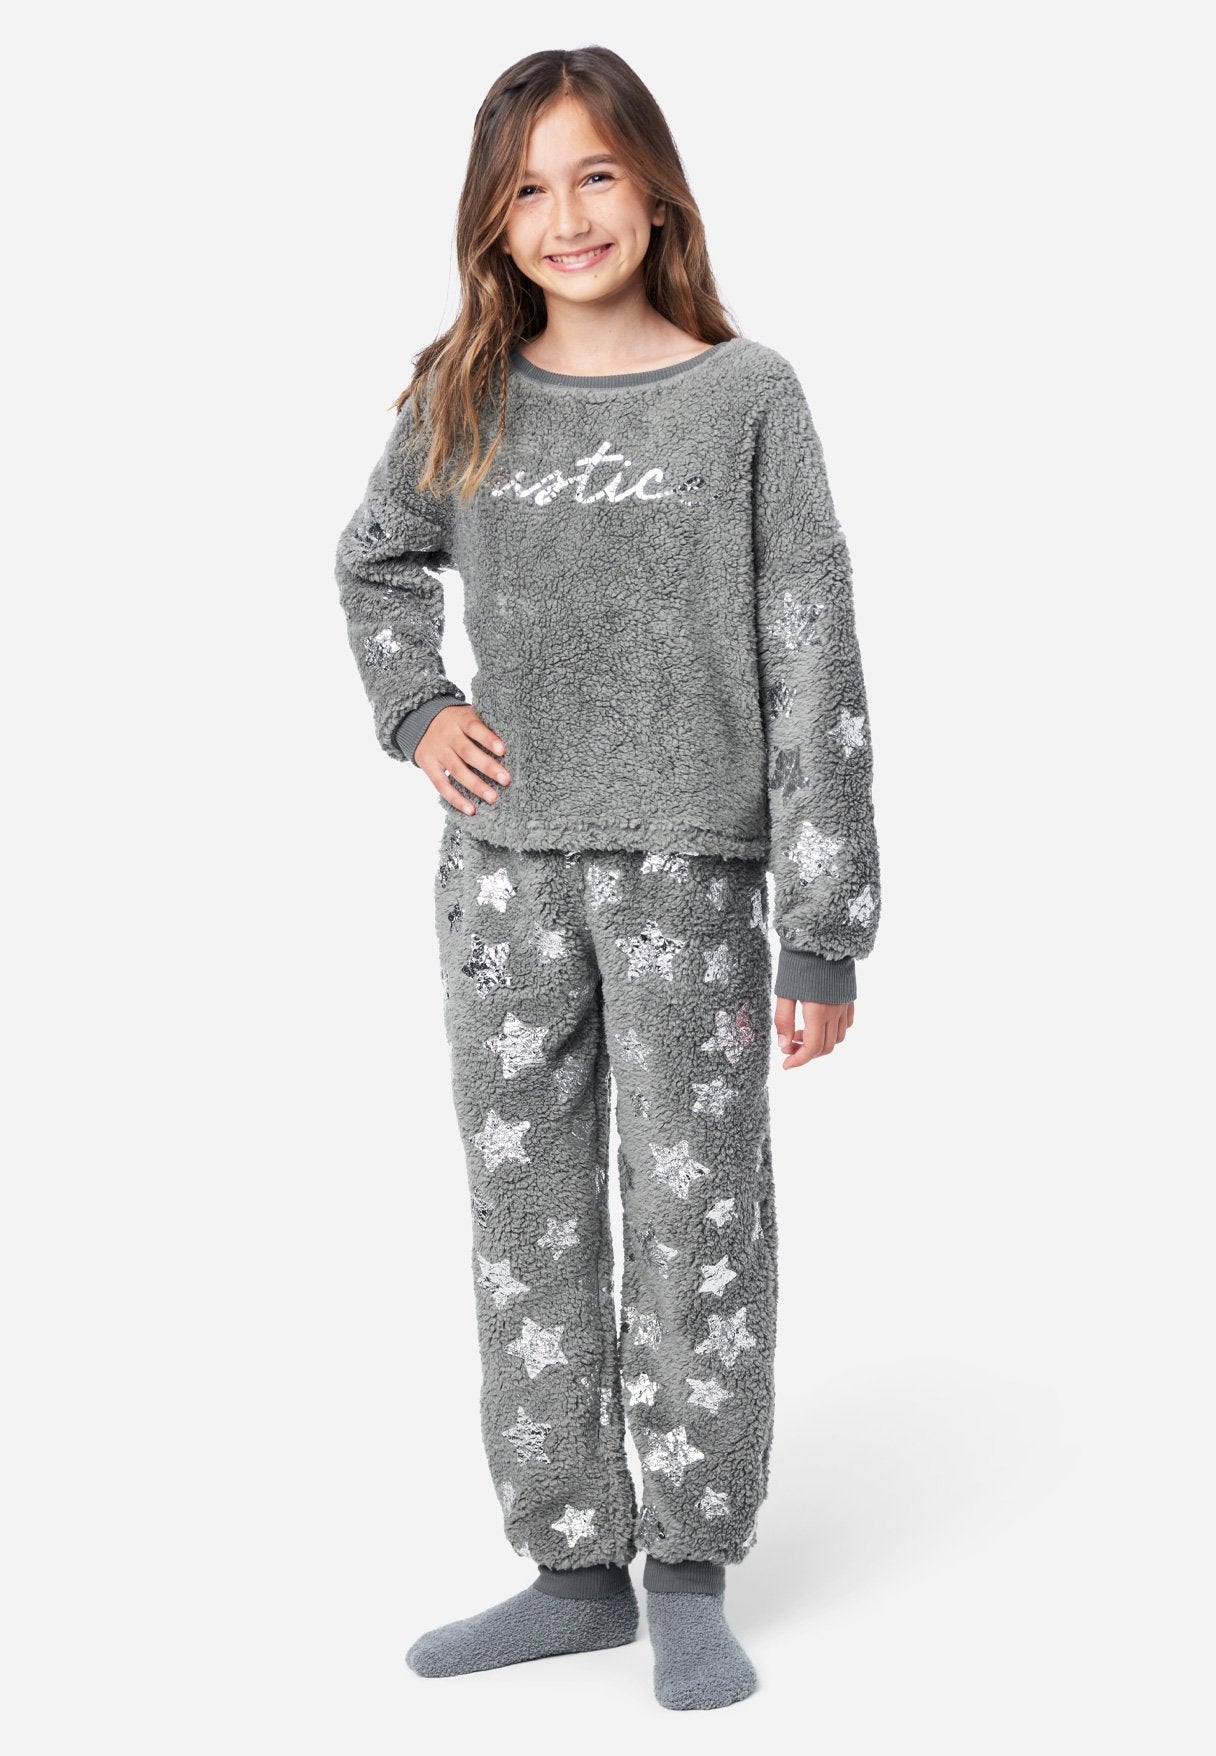 Justice Faux Sherpa Patterned Girl's Pajama Set in Slate, Size Small (7/8)